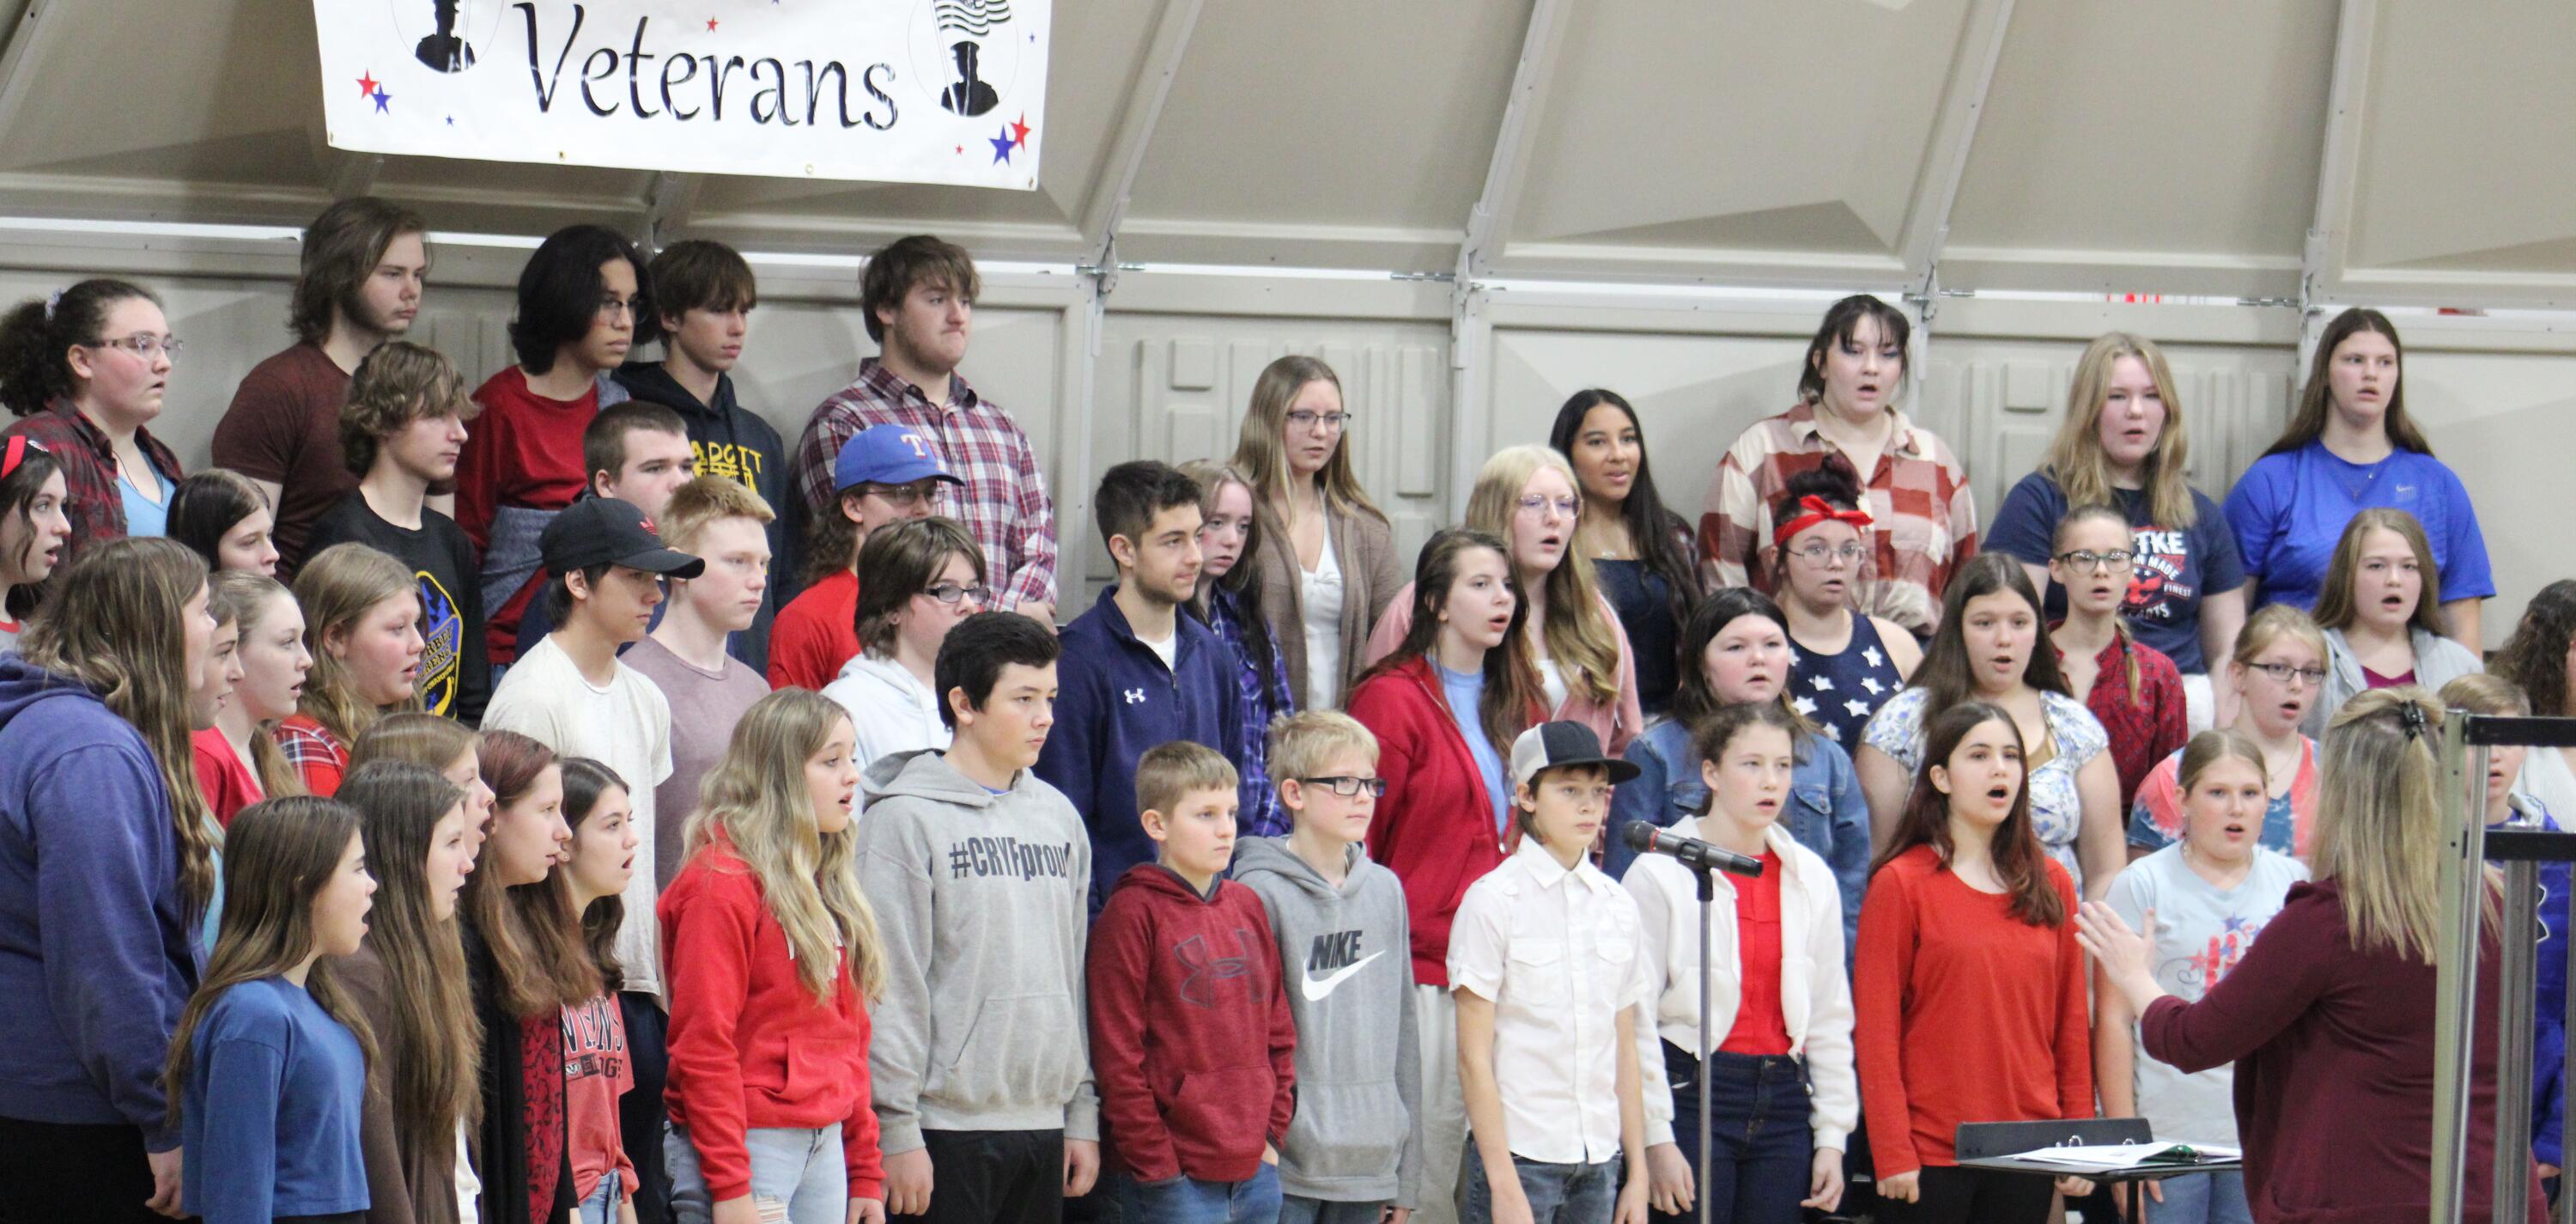 Students singing during the Veteran's Day ceremony.